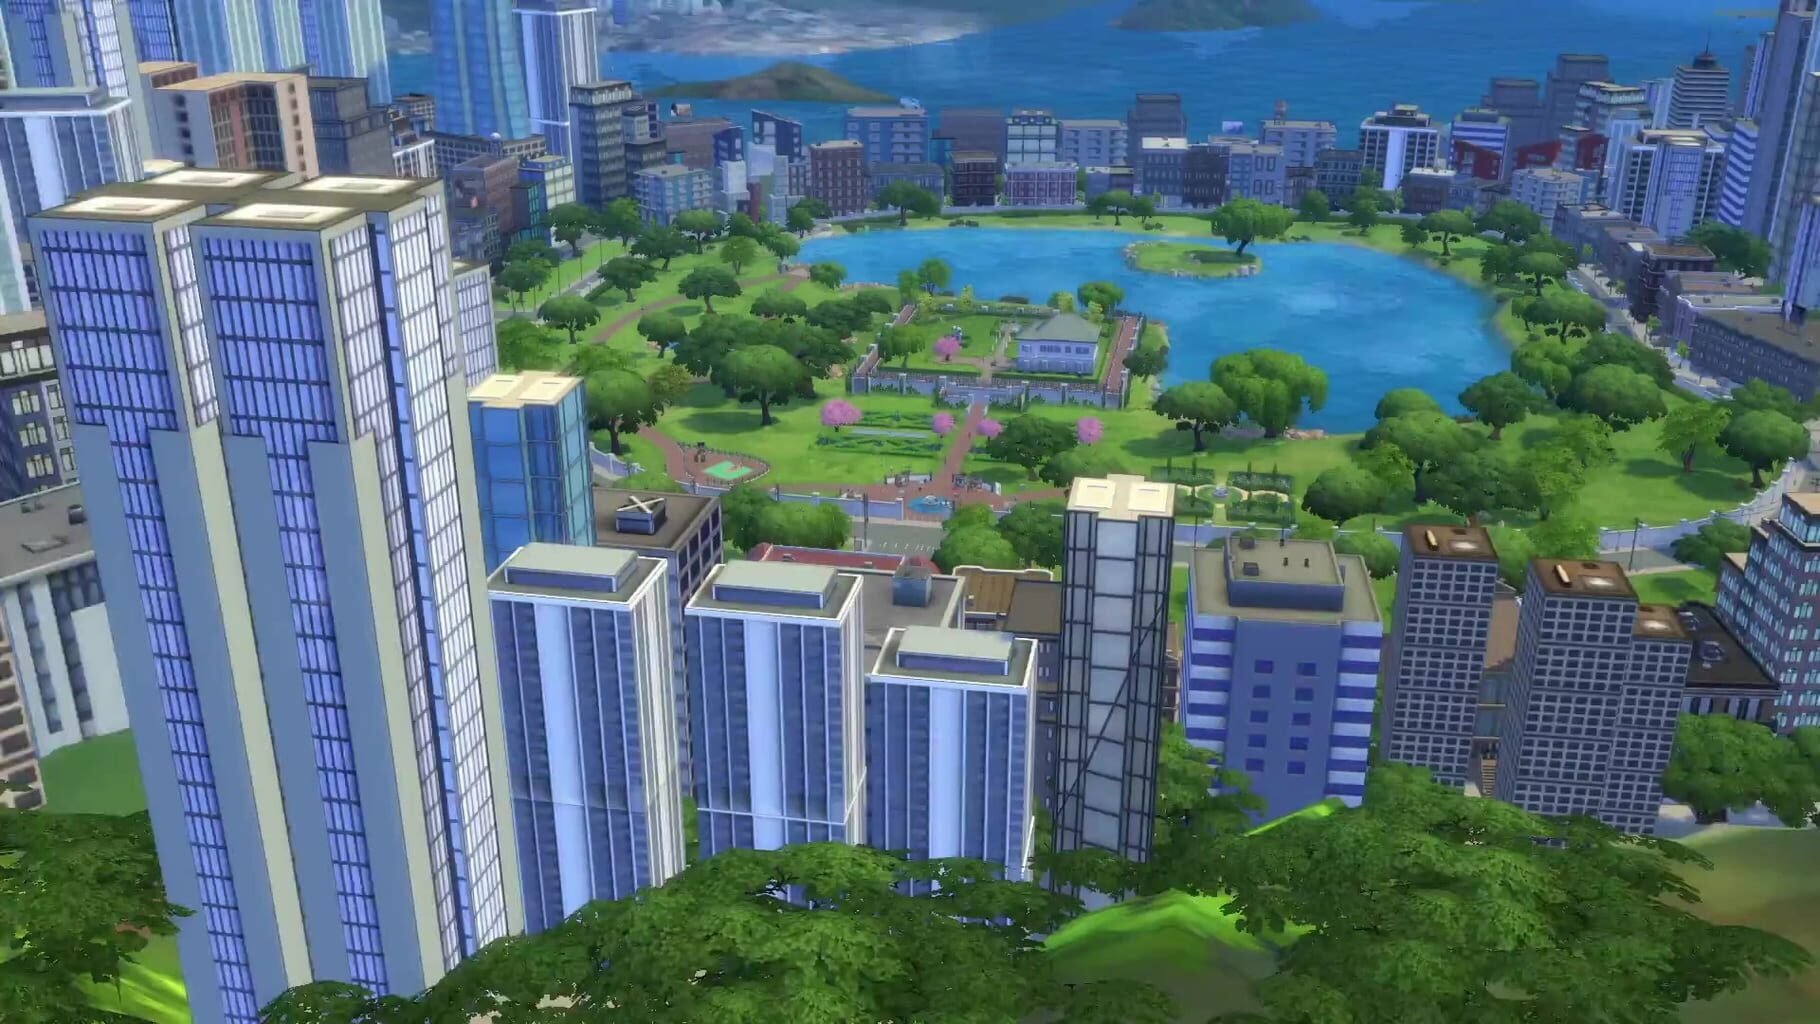 The Sims 4: City Living Image